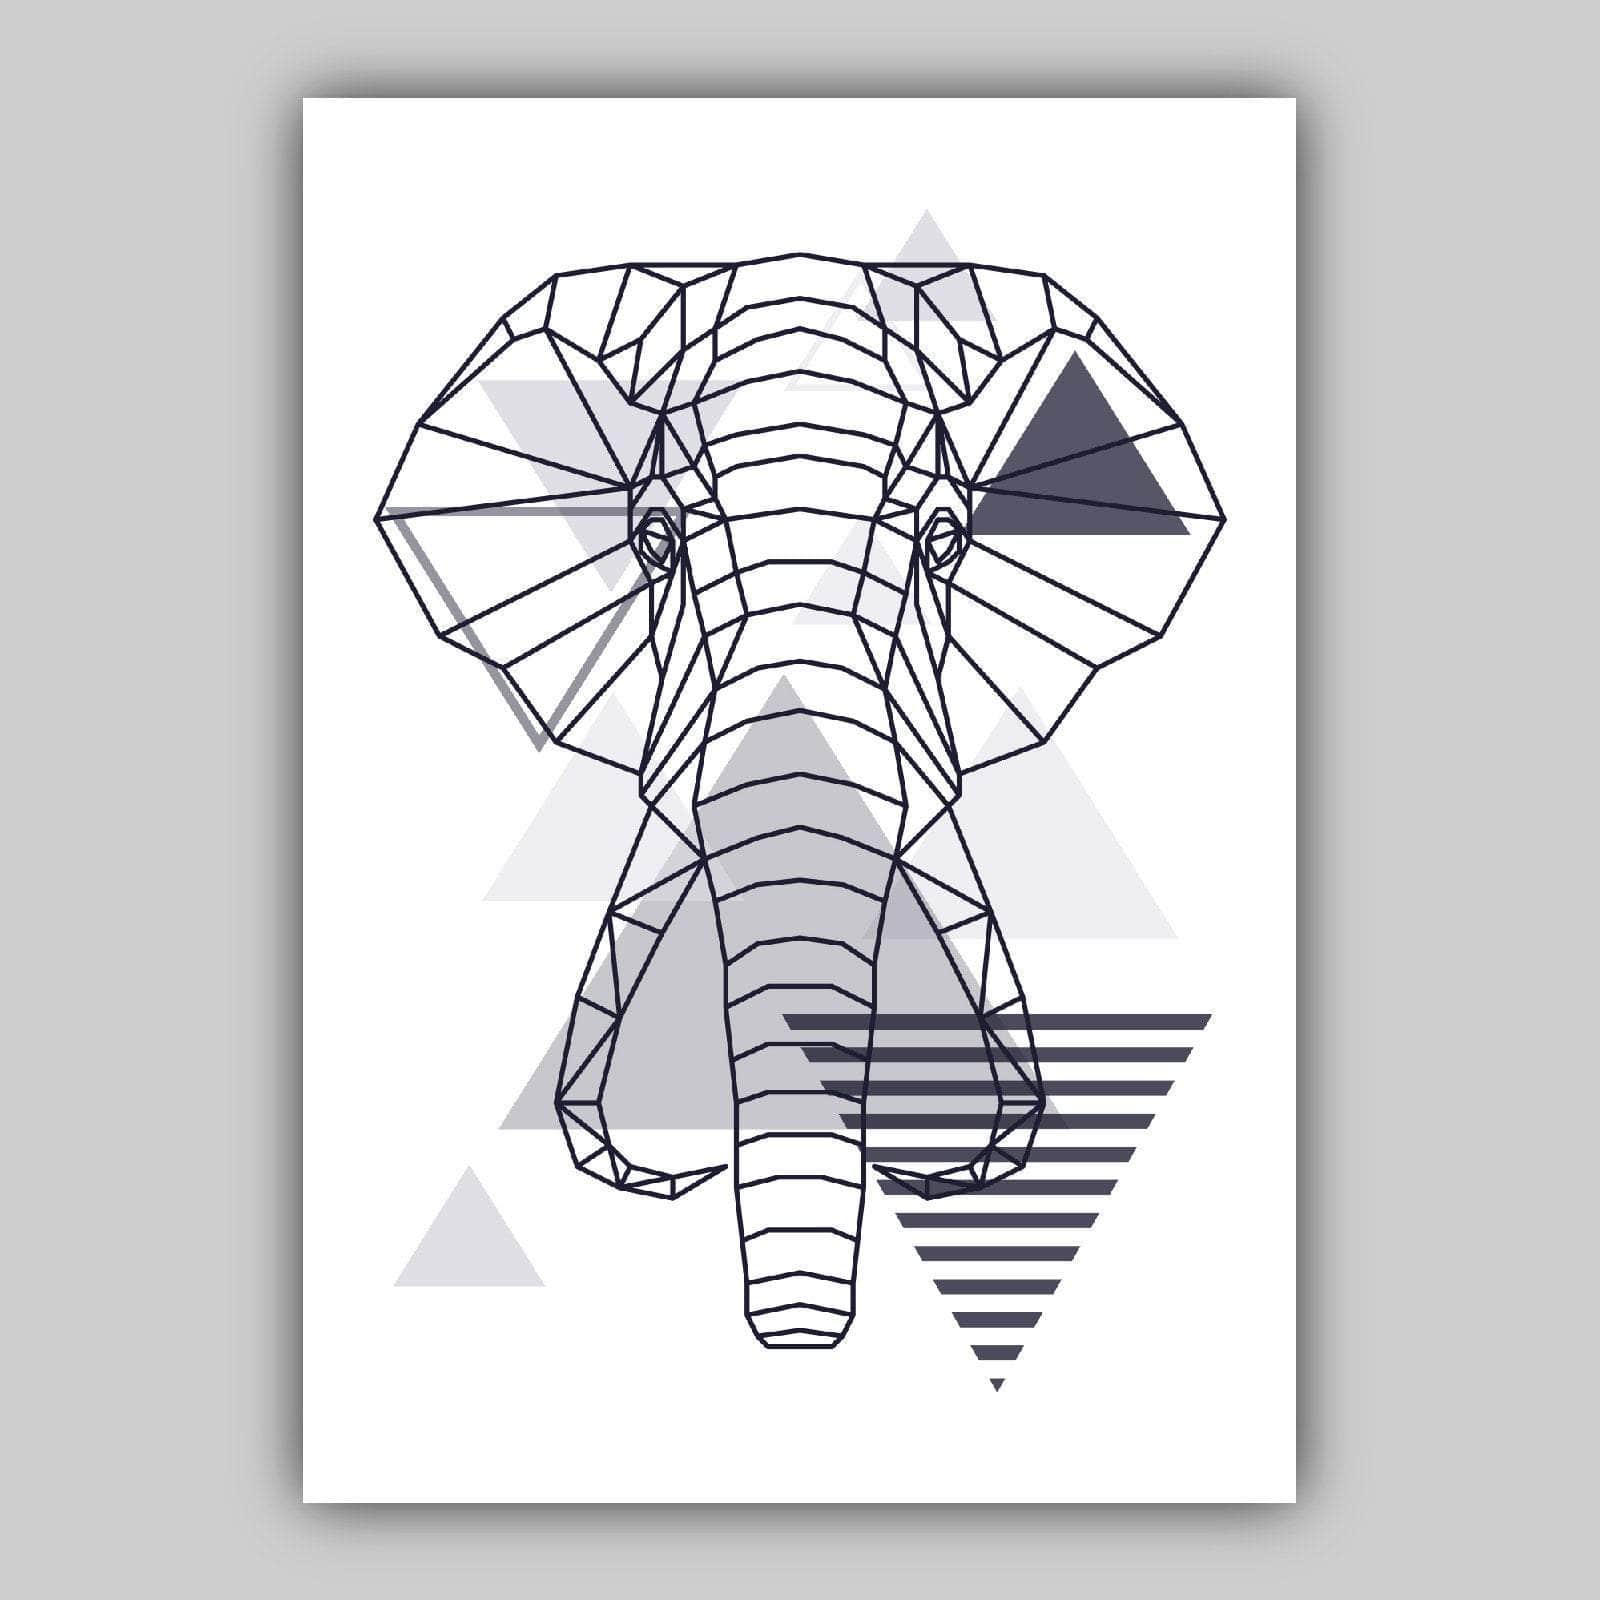 Set of 5 Gallery Wall Art Scandinavian  Navy Blue and Grey Art Prints Elephant Art Mountains GEOMETRIC Wall Pictures Posters Artwork